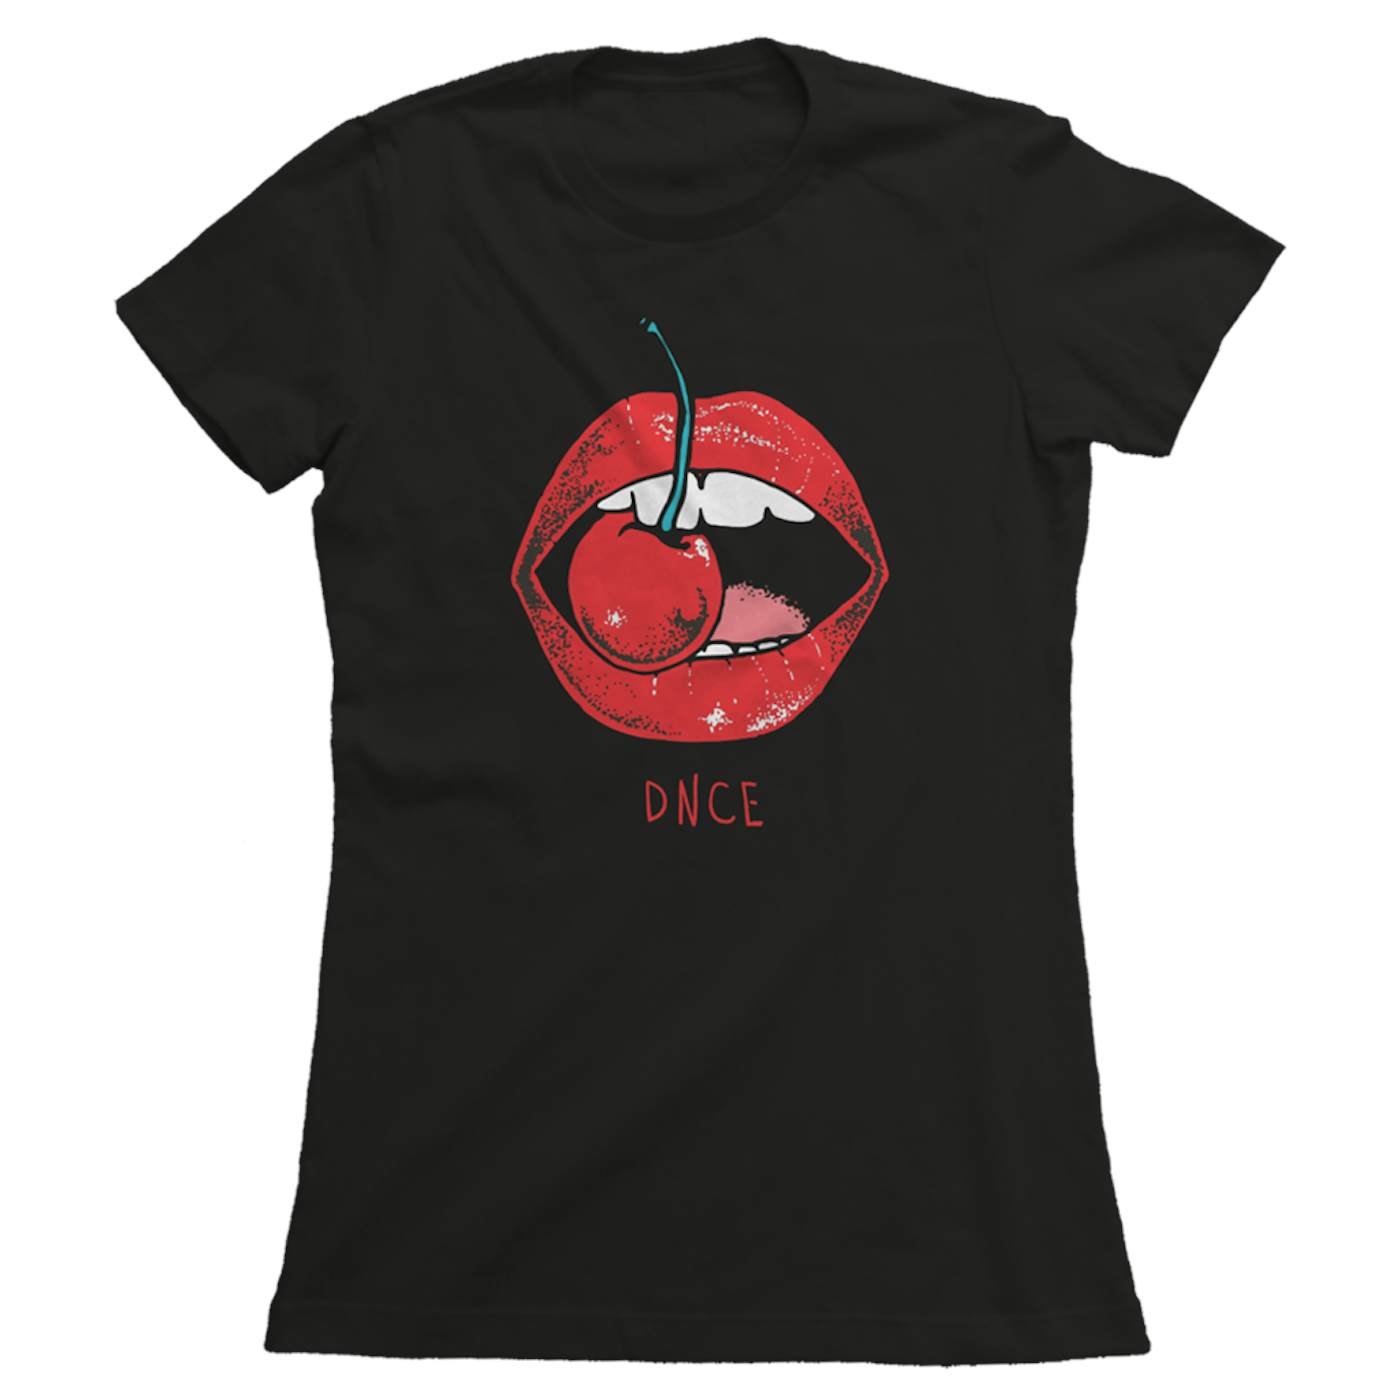 DNCE Cherry Mouth Juniors Tee